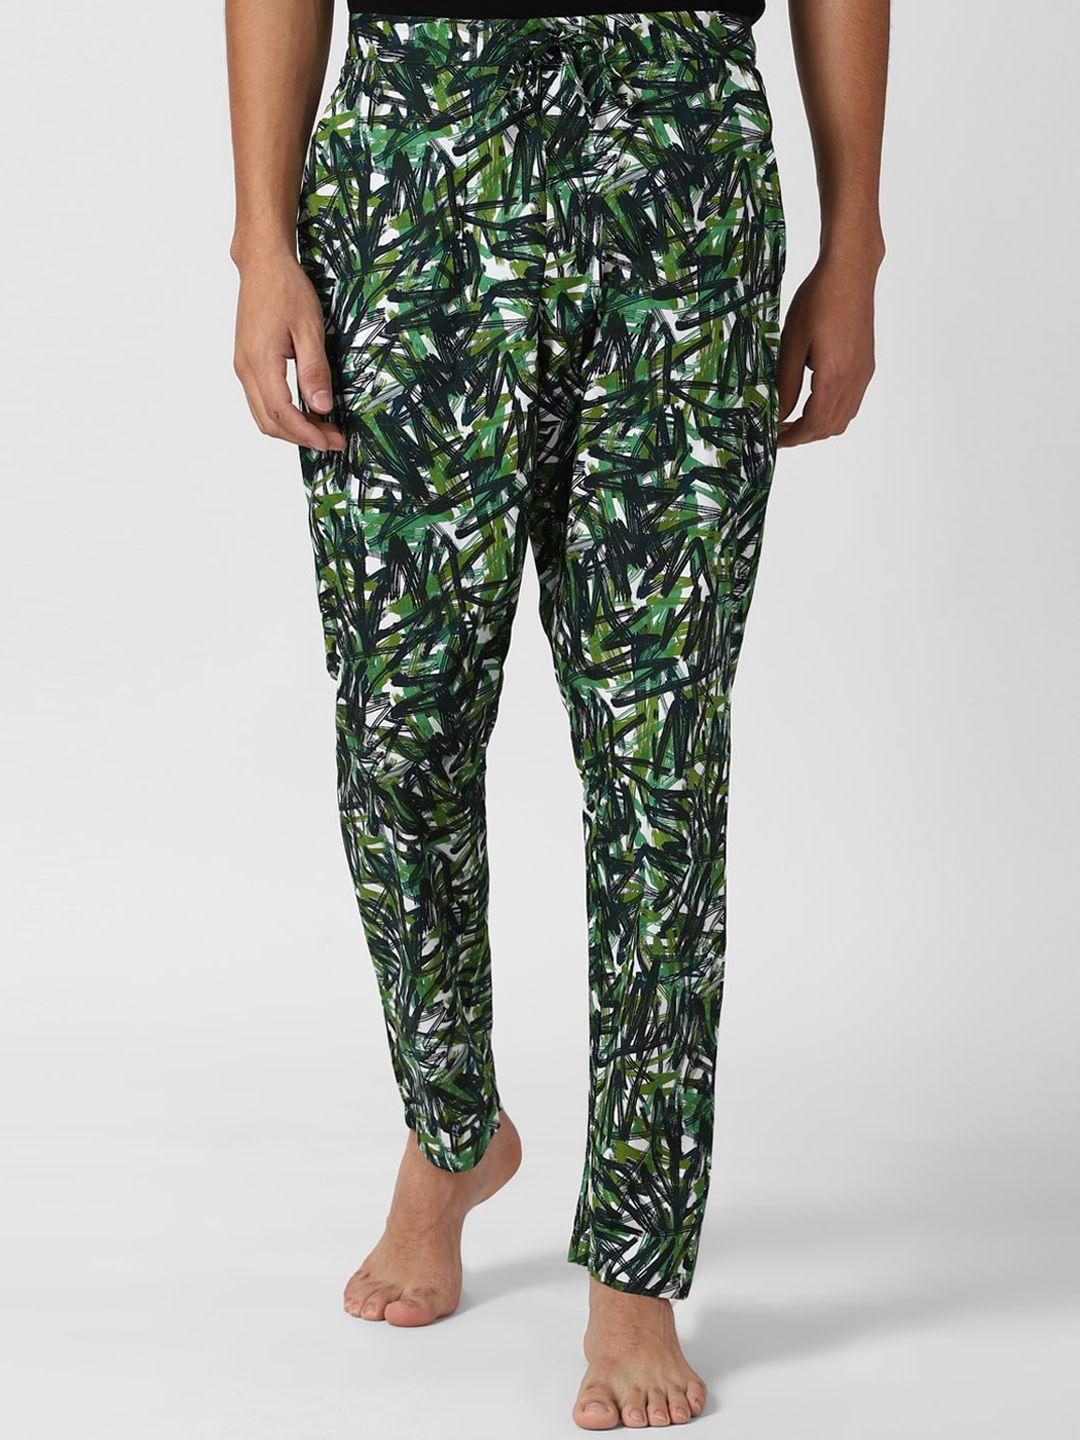 peter england men green & white printed pure cotton loose-fit lounge pants